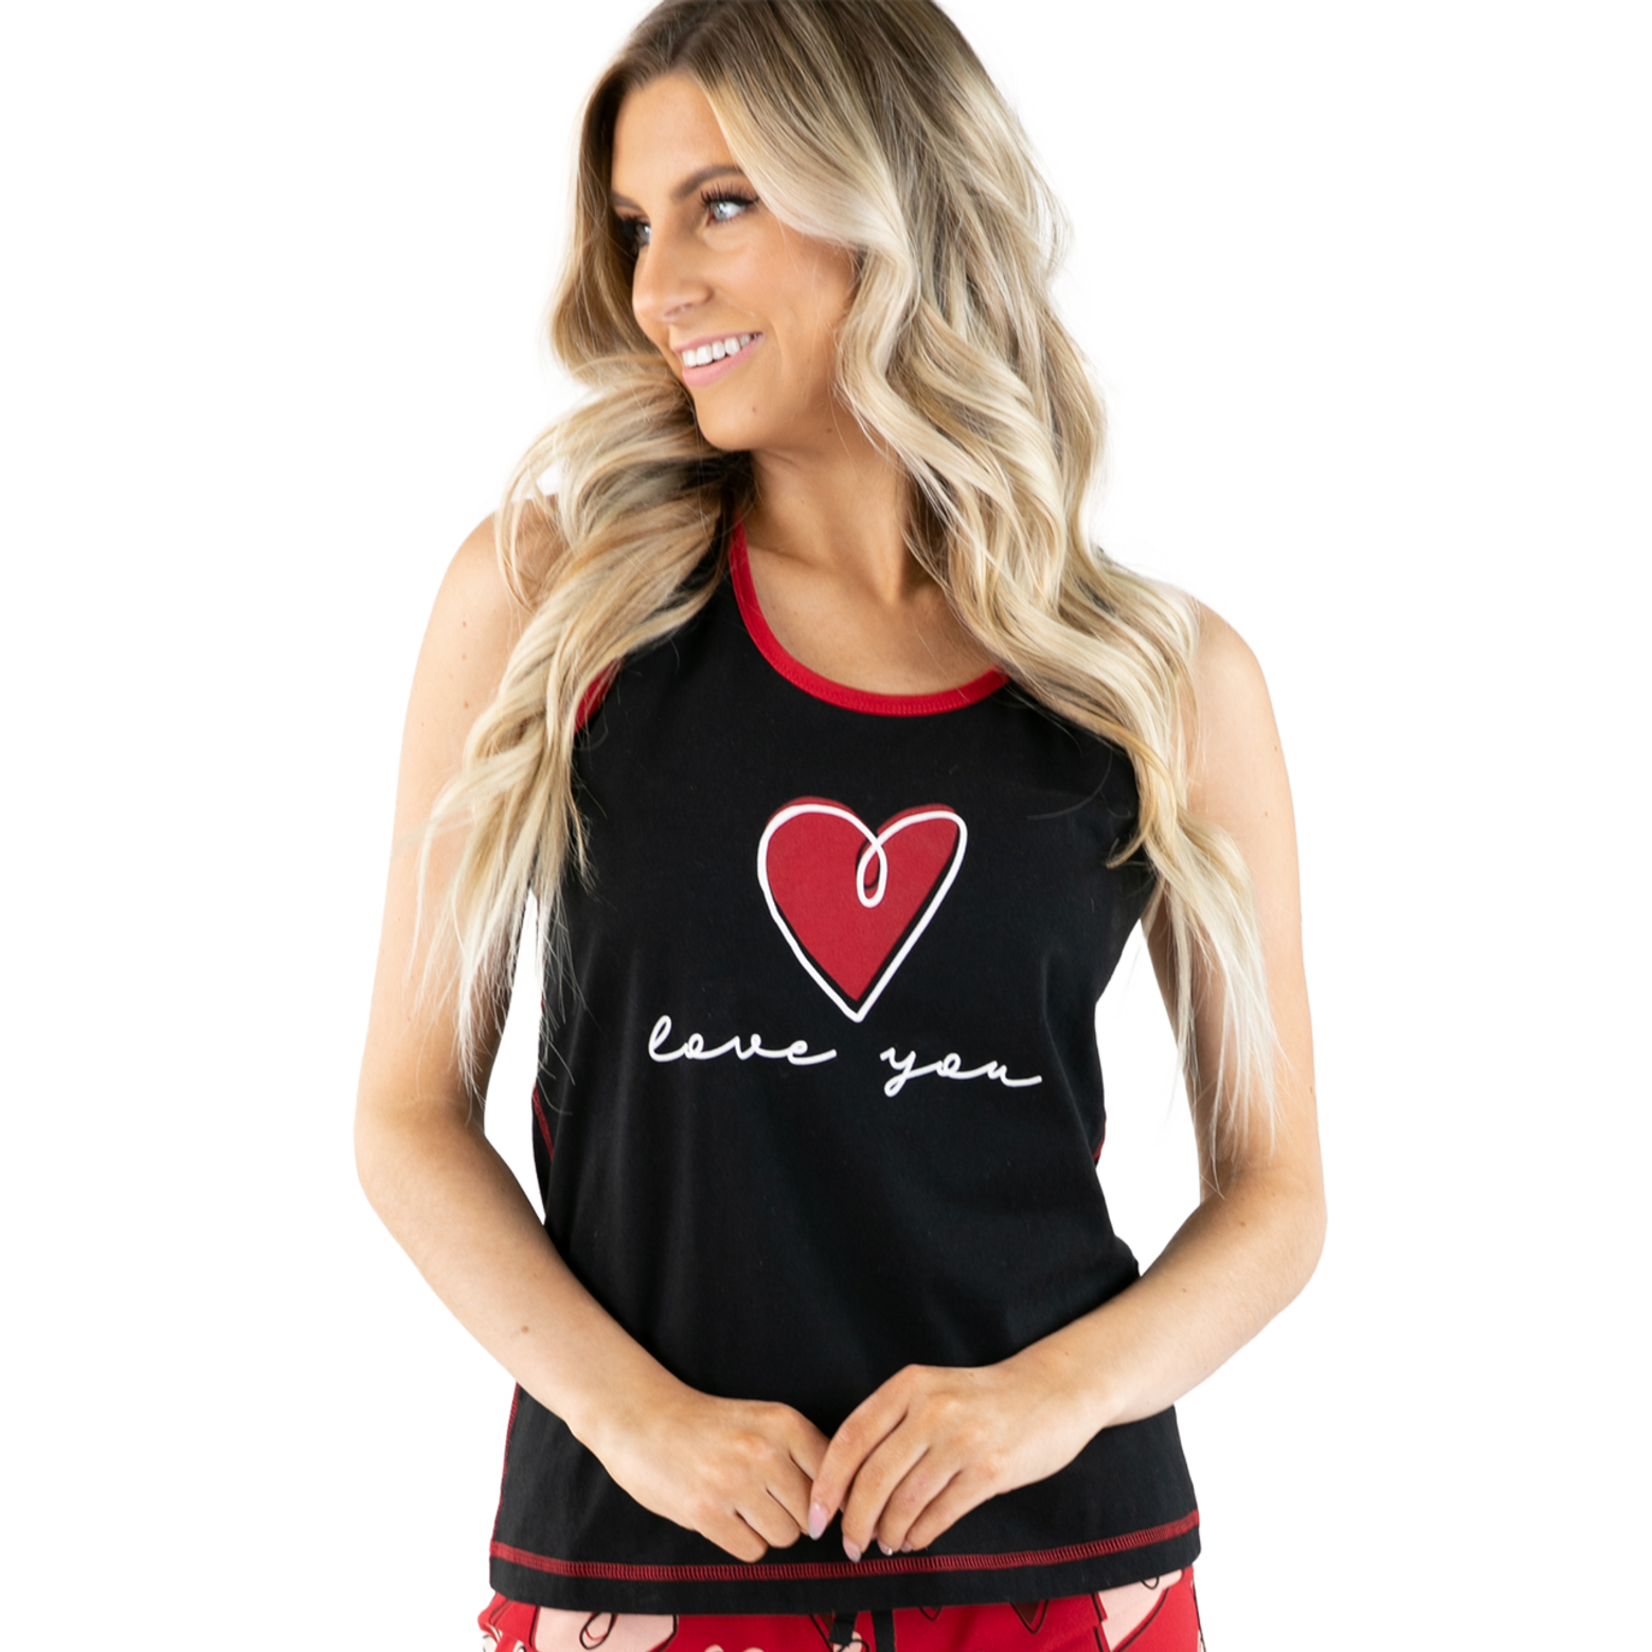 Lazy One Love You Women's Tank Top